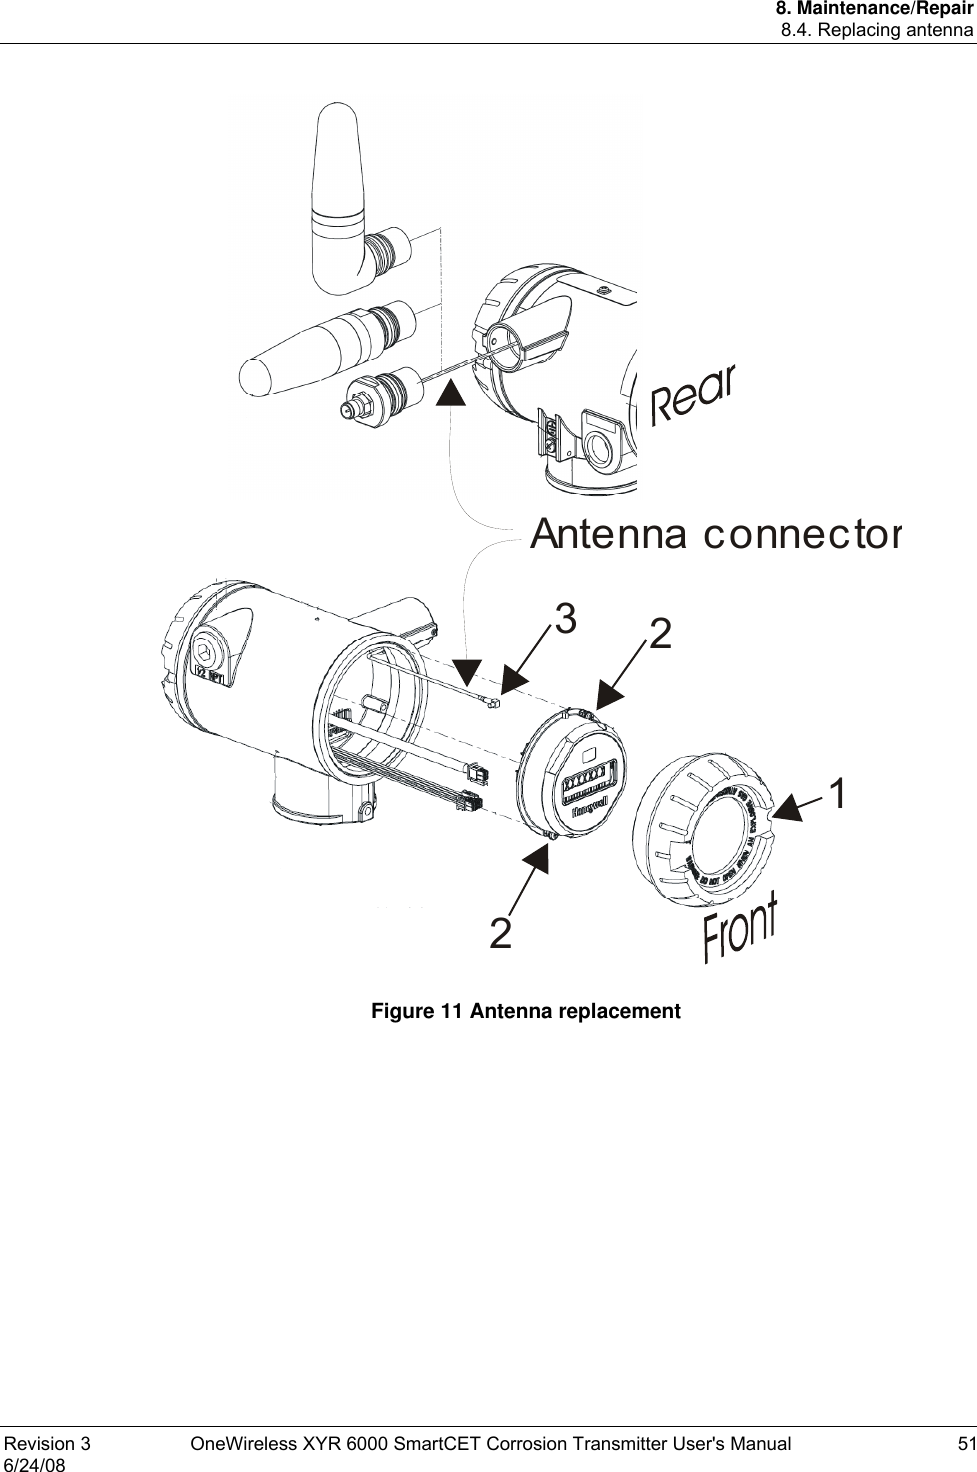 8. Maintenance/Repair 8.4. Replacing antenna Revision 3  OneWireless XYR 6000 SmartCET Corrosion Transmitter User&apos;s Manual  51 6/24/08 Antenna connector1223  Figure 11 Antenna replacement  